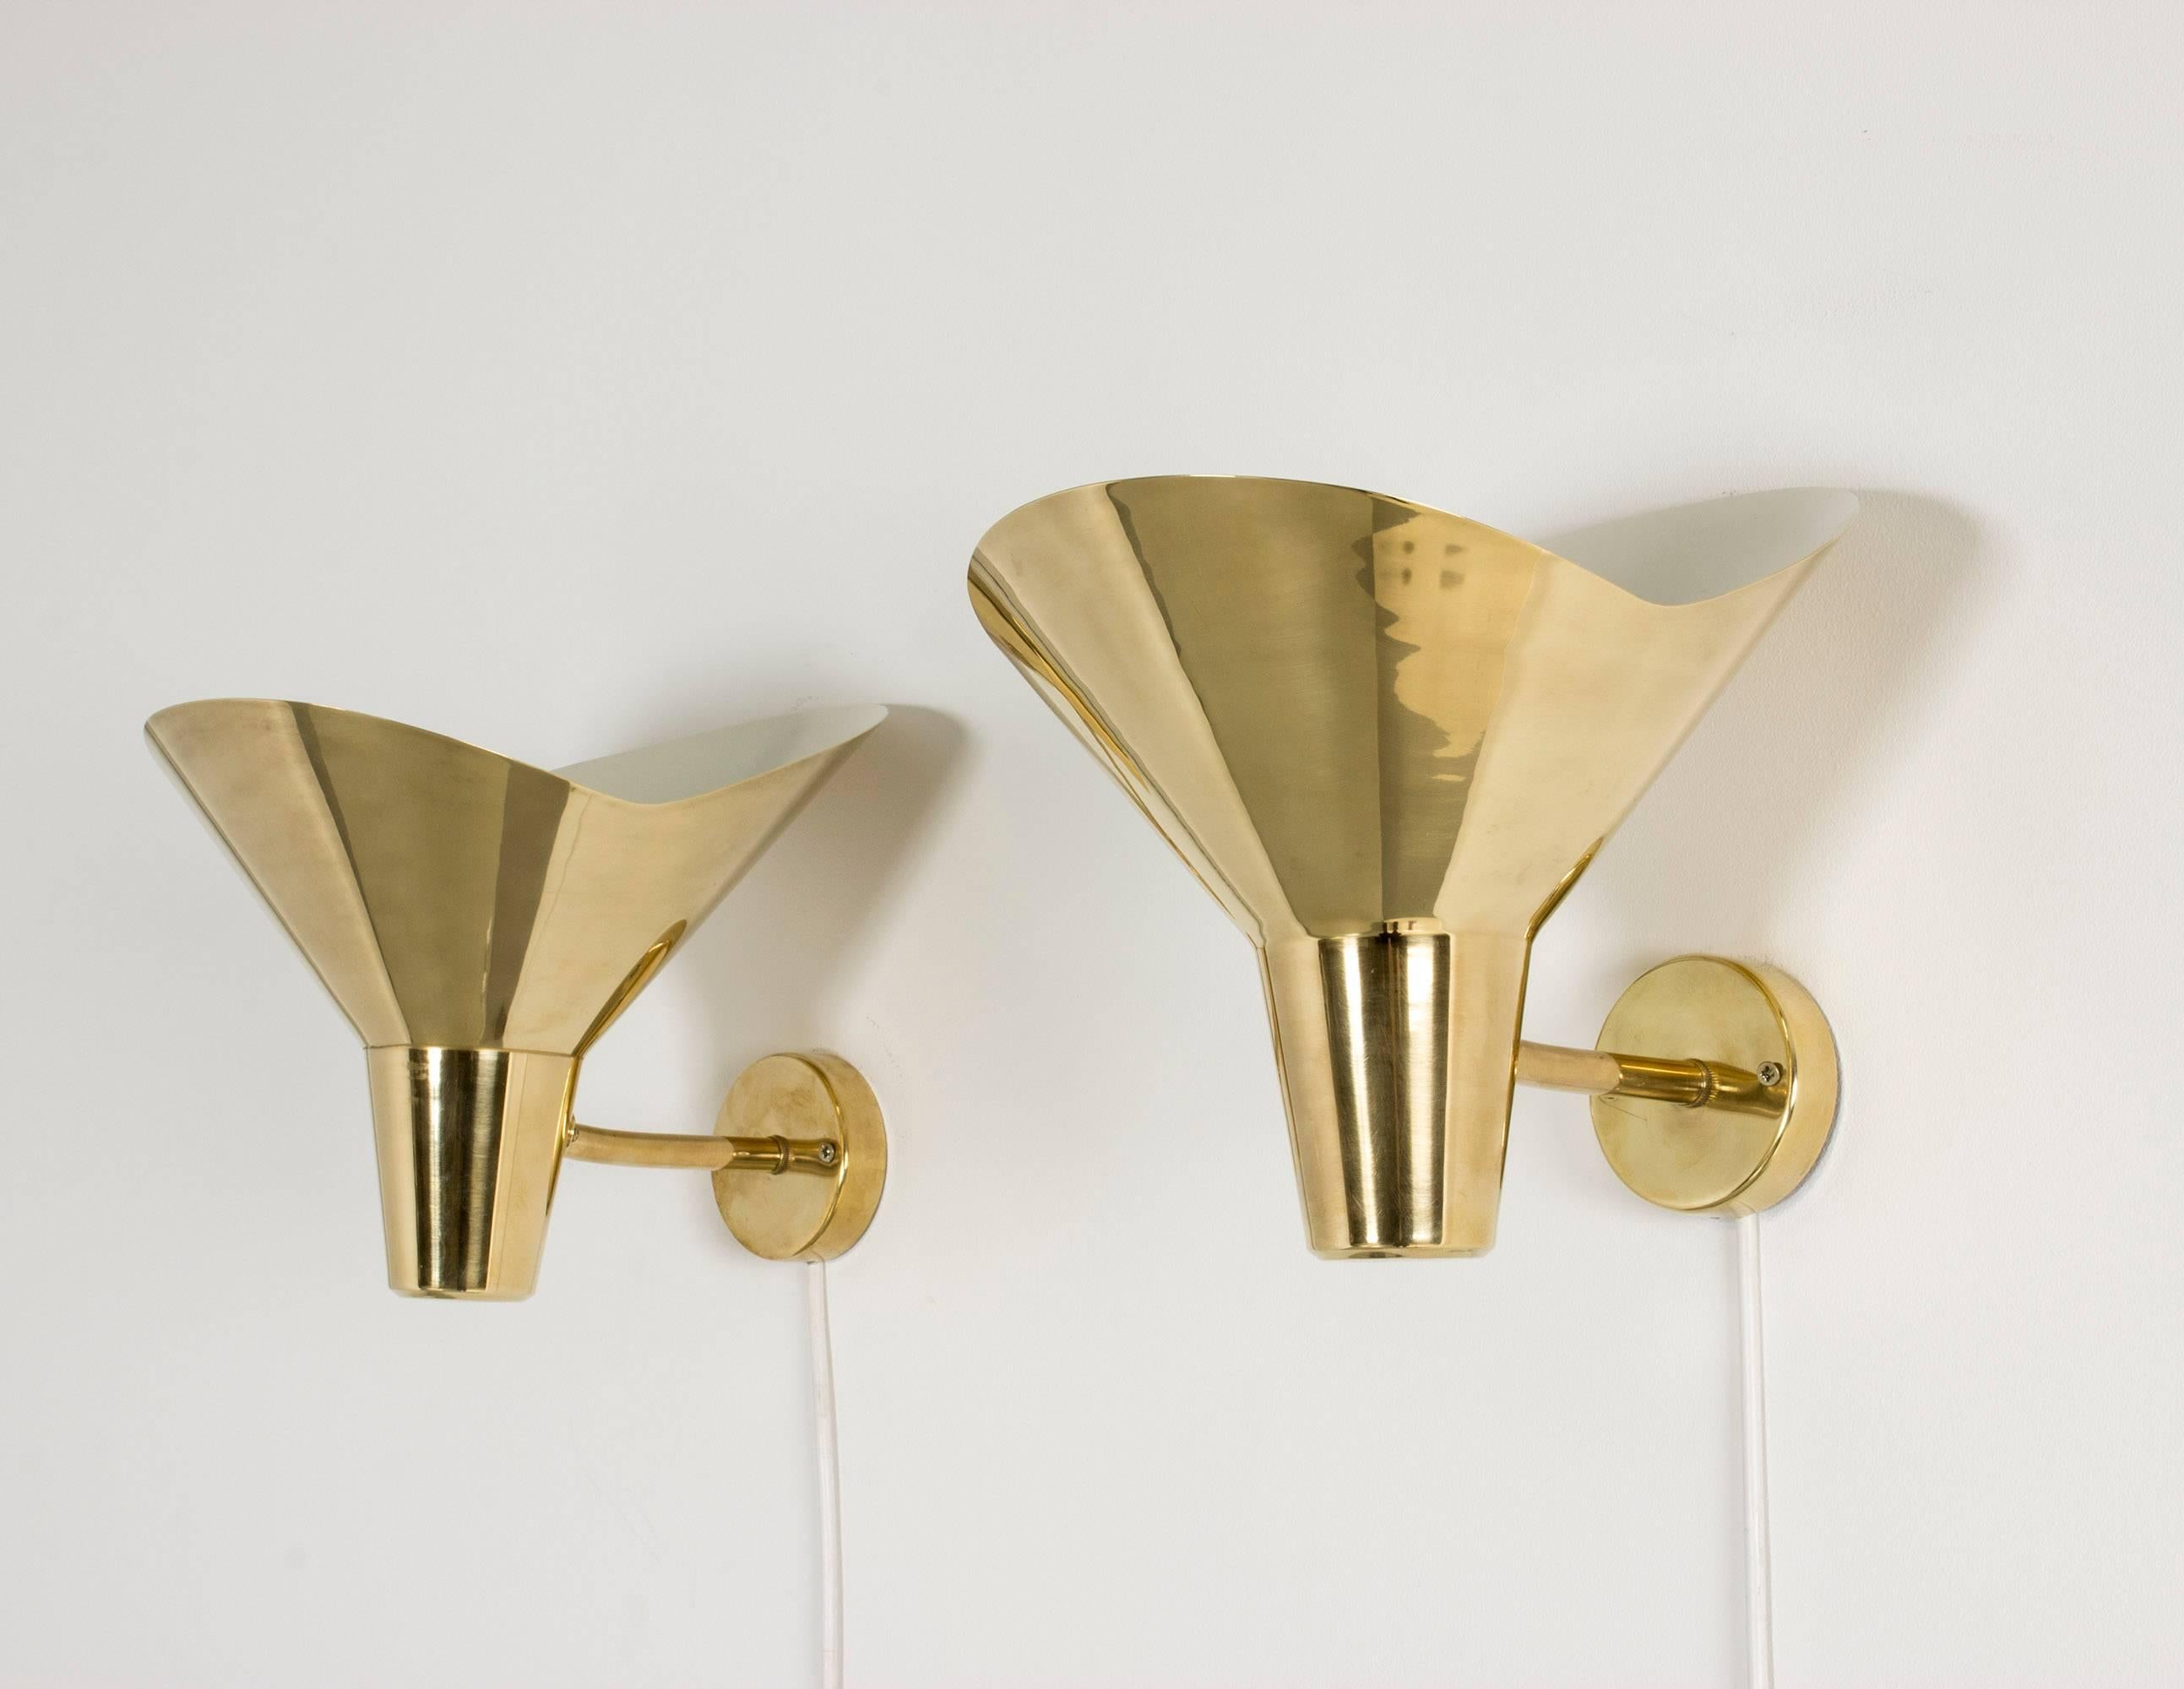 Pair of beautiful up light wall sconces by Hans Bergström, made in brass with white lacquered insides. Lovely undulating edges.